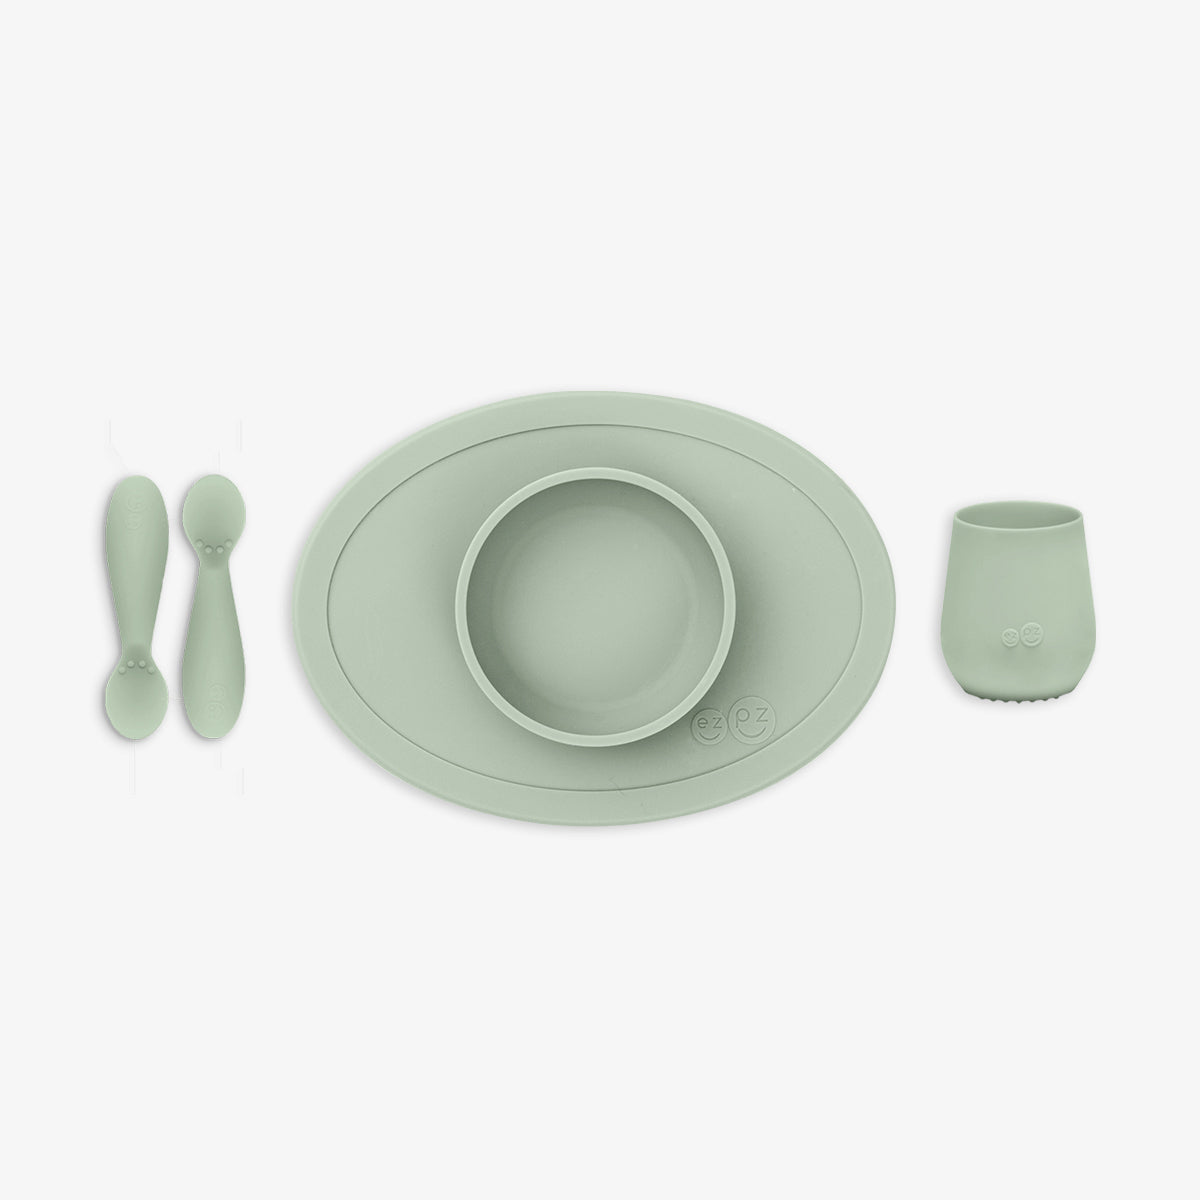 First Foods Set in Sage by ezpz / The Original All-In-One Silicone Plates & Placemats that Stick to the Table